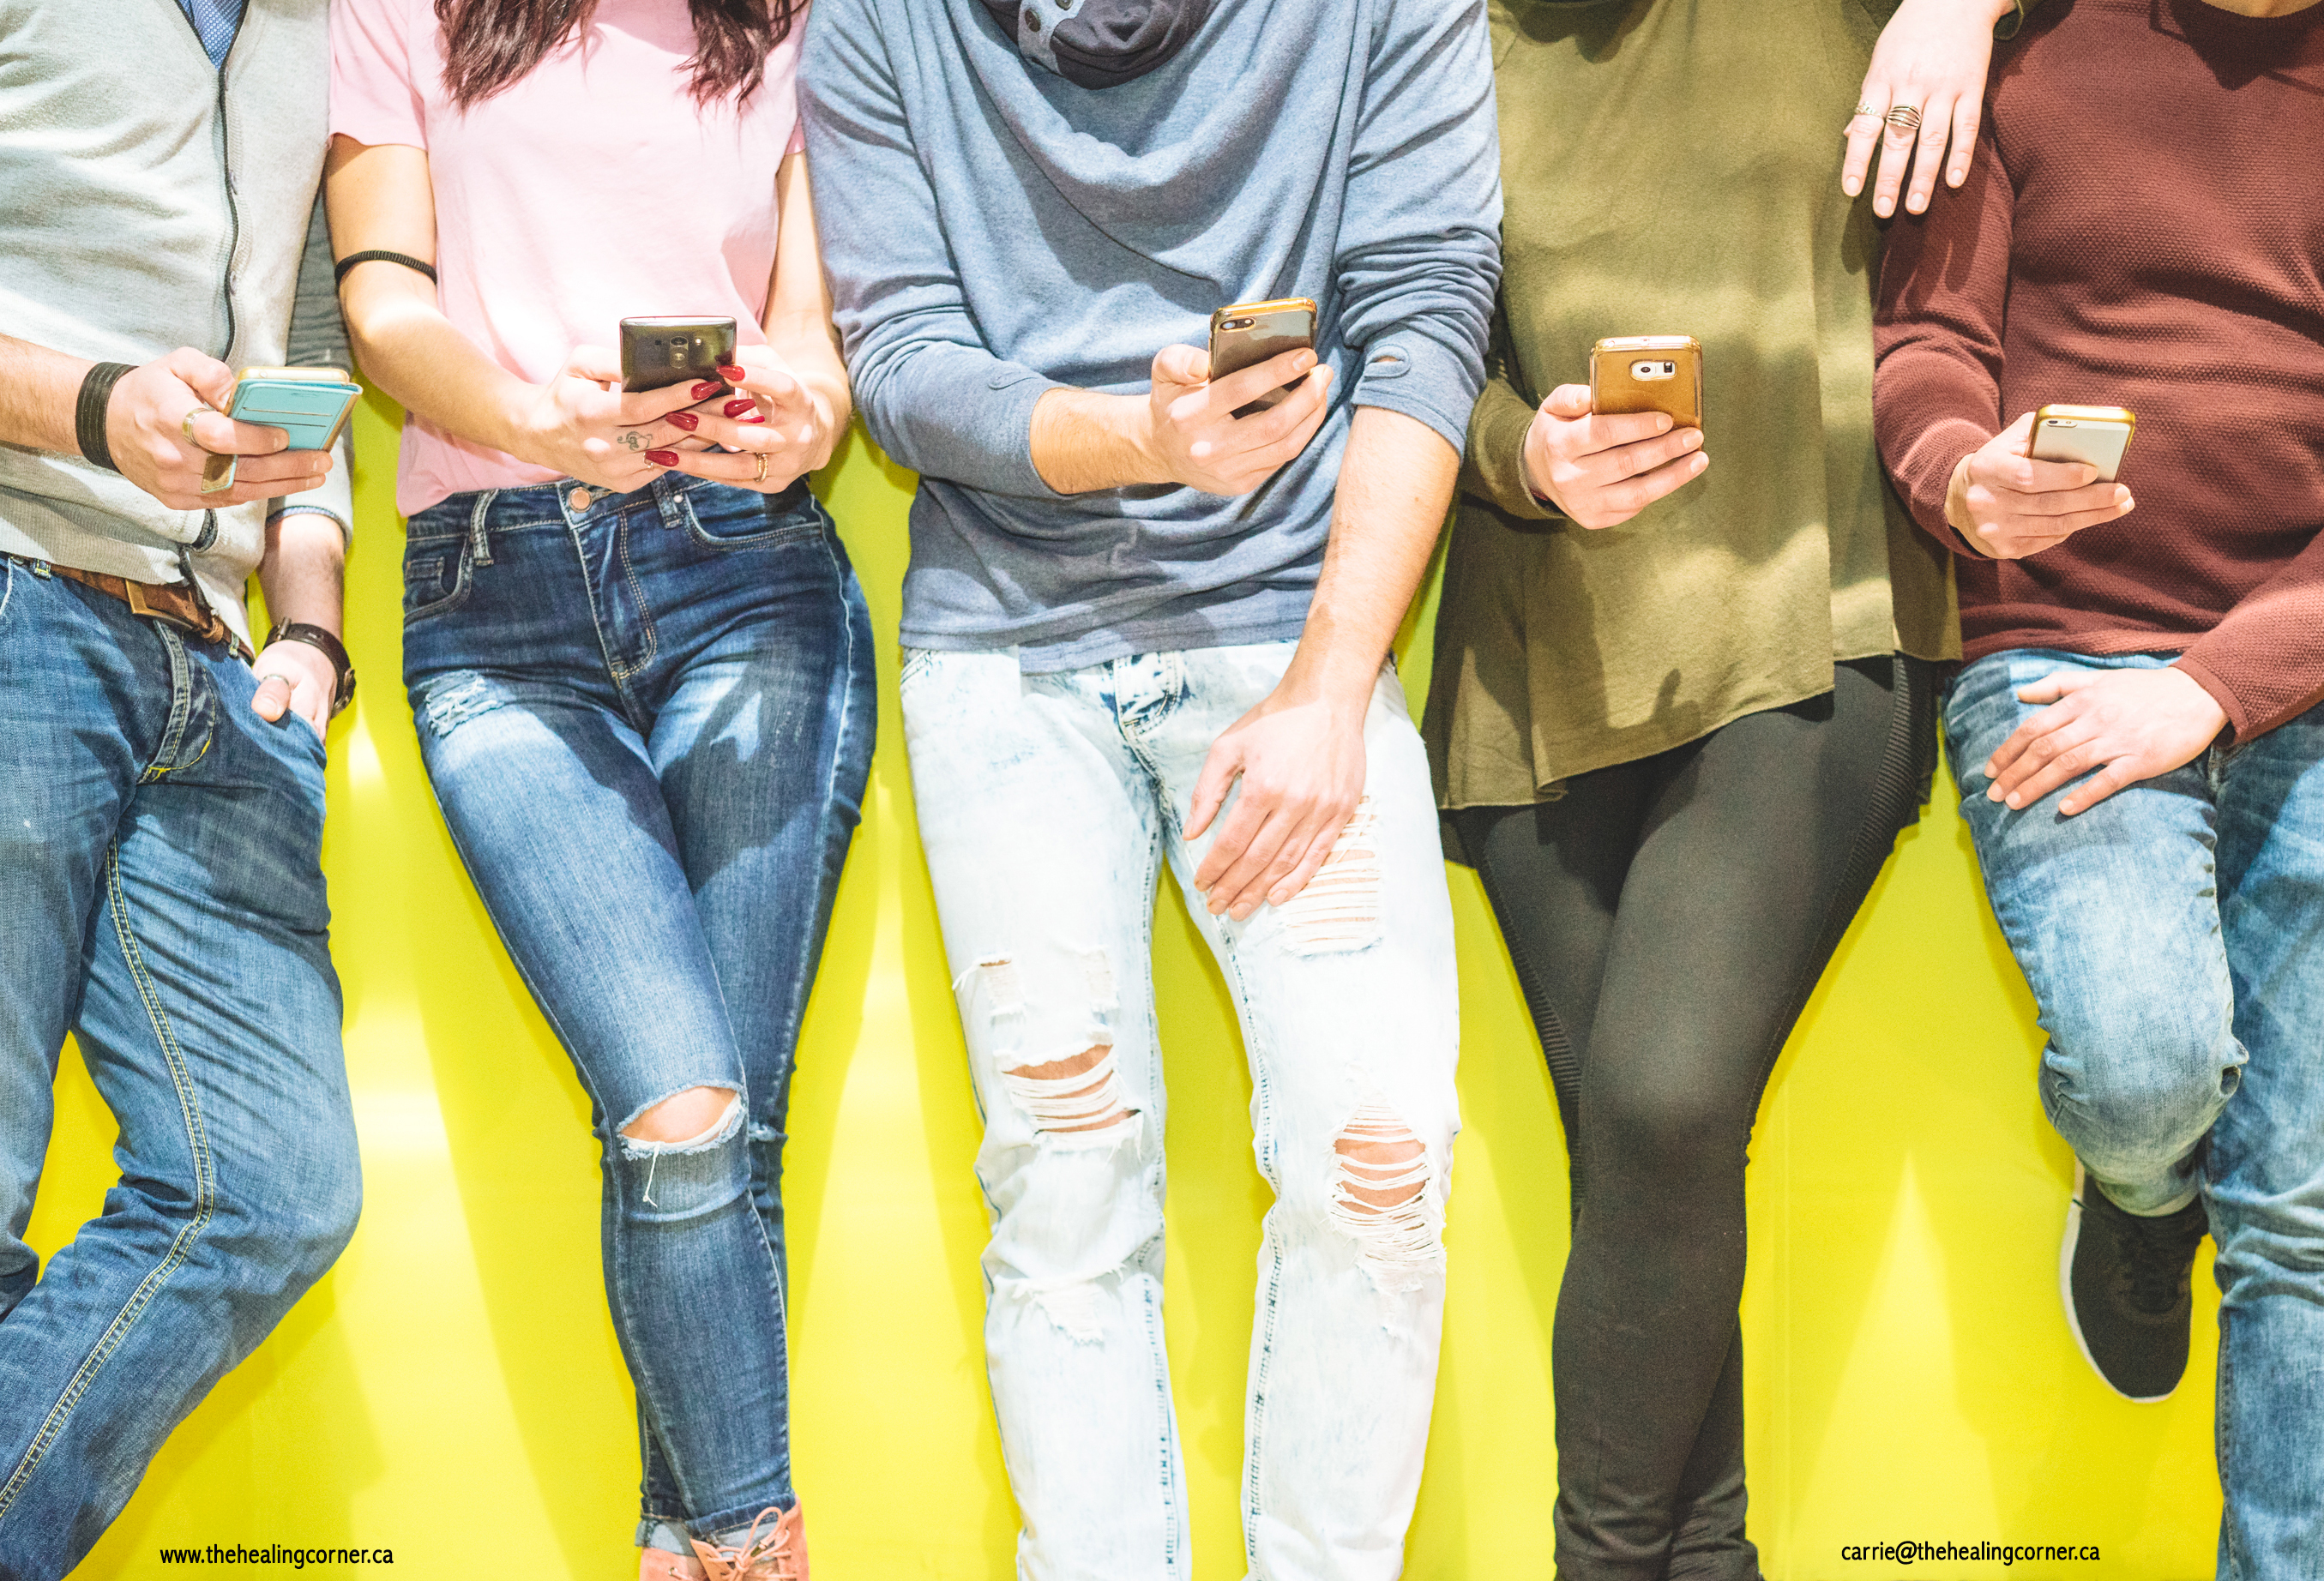 Group of friends having a social network moment watching on their mobile phones - People leaning on a yellow wall on their phones texting an